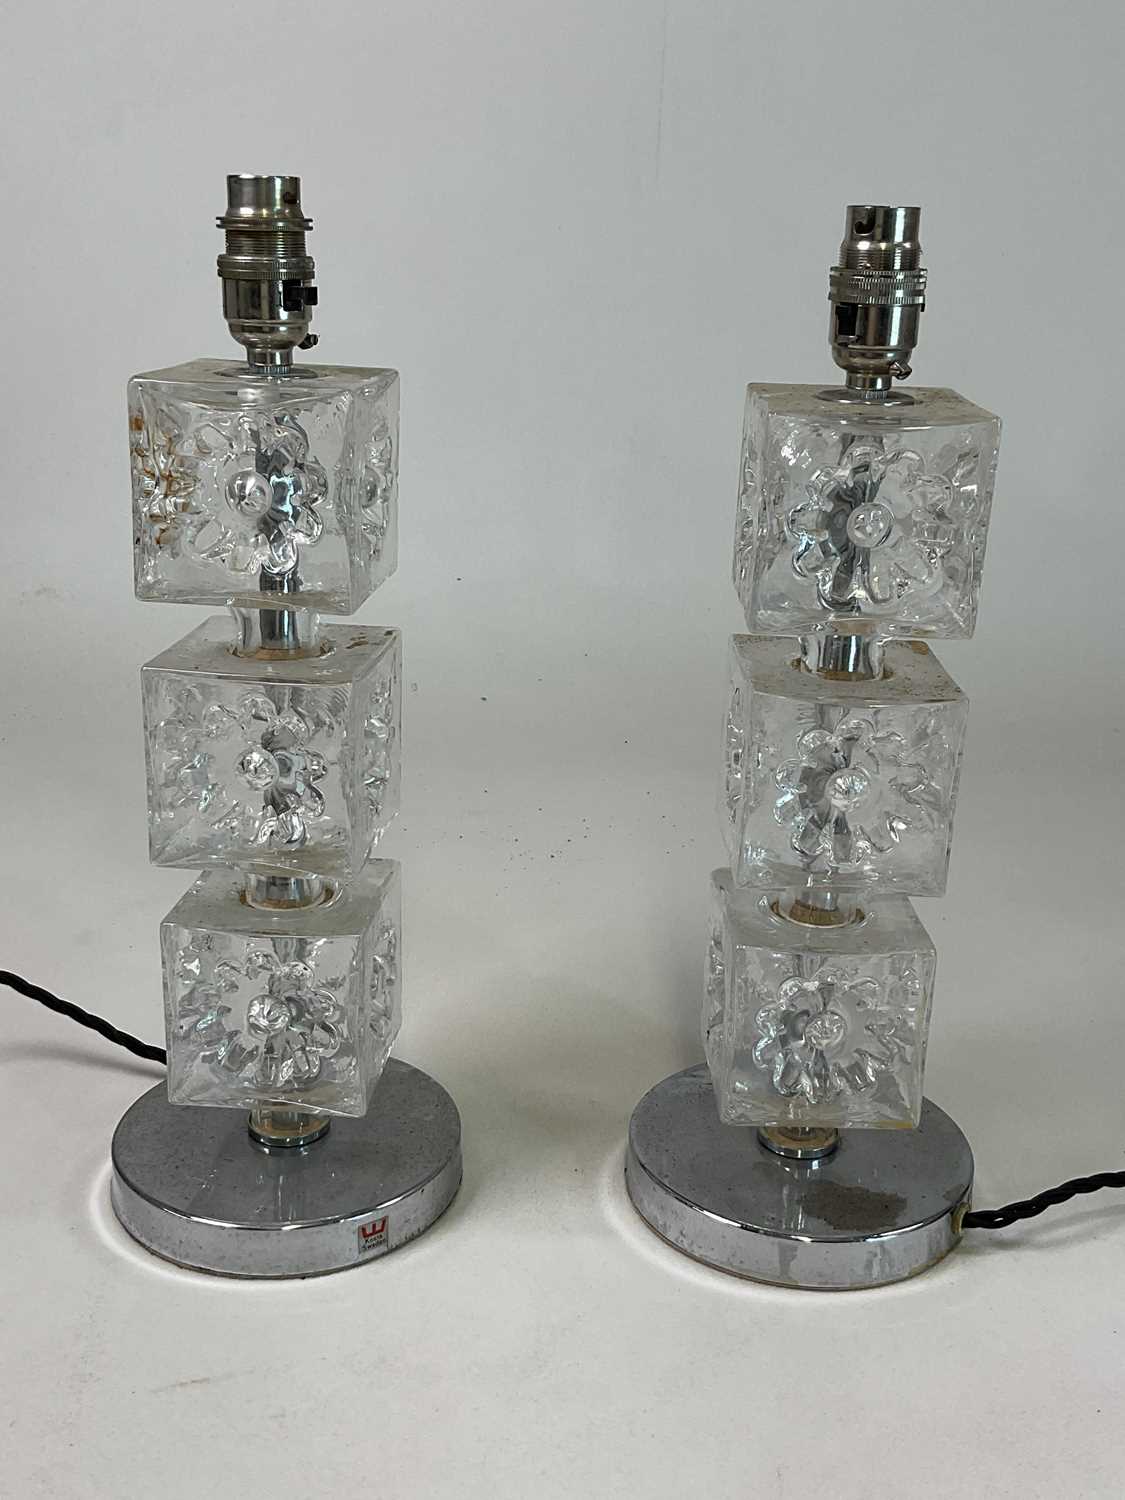 KOSTA; a pair of mid 20th century Swedish art glass table lamps, height 38cm.